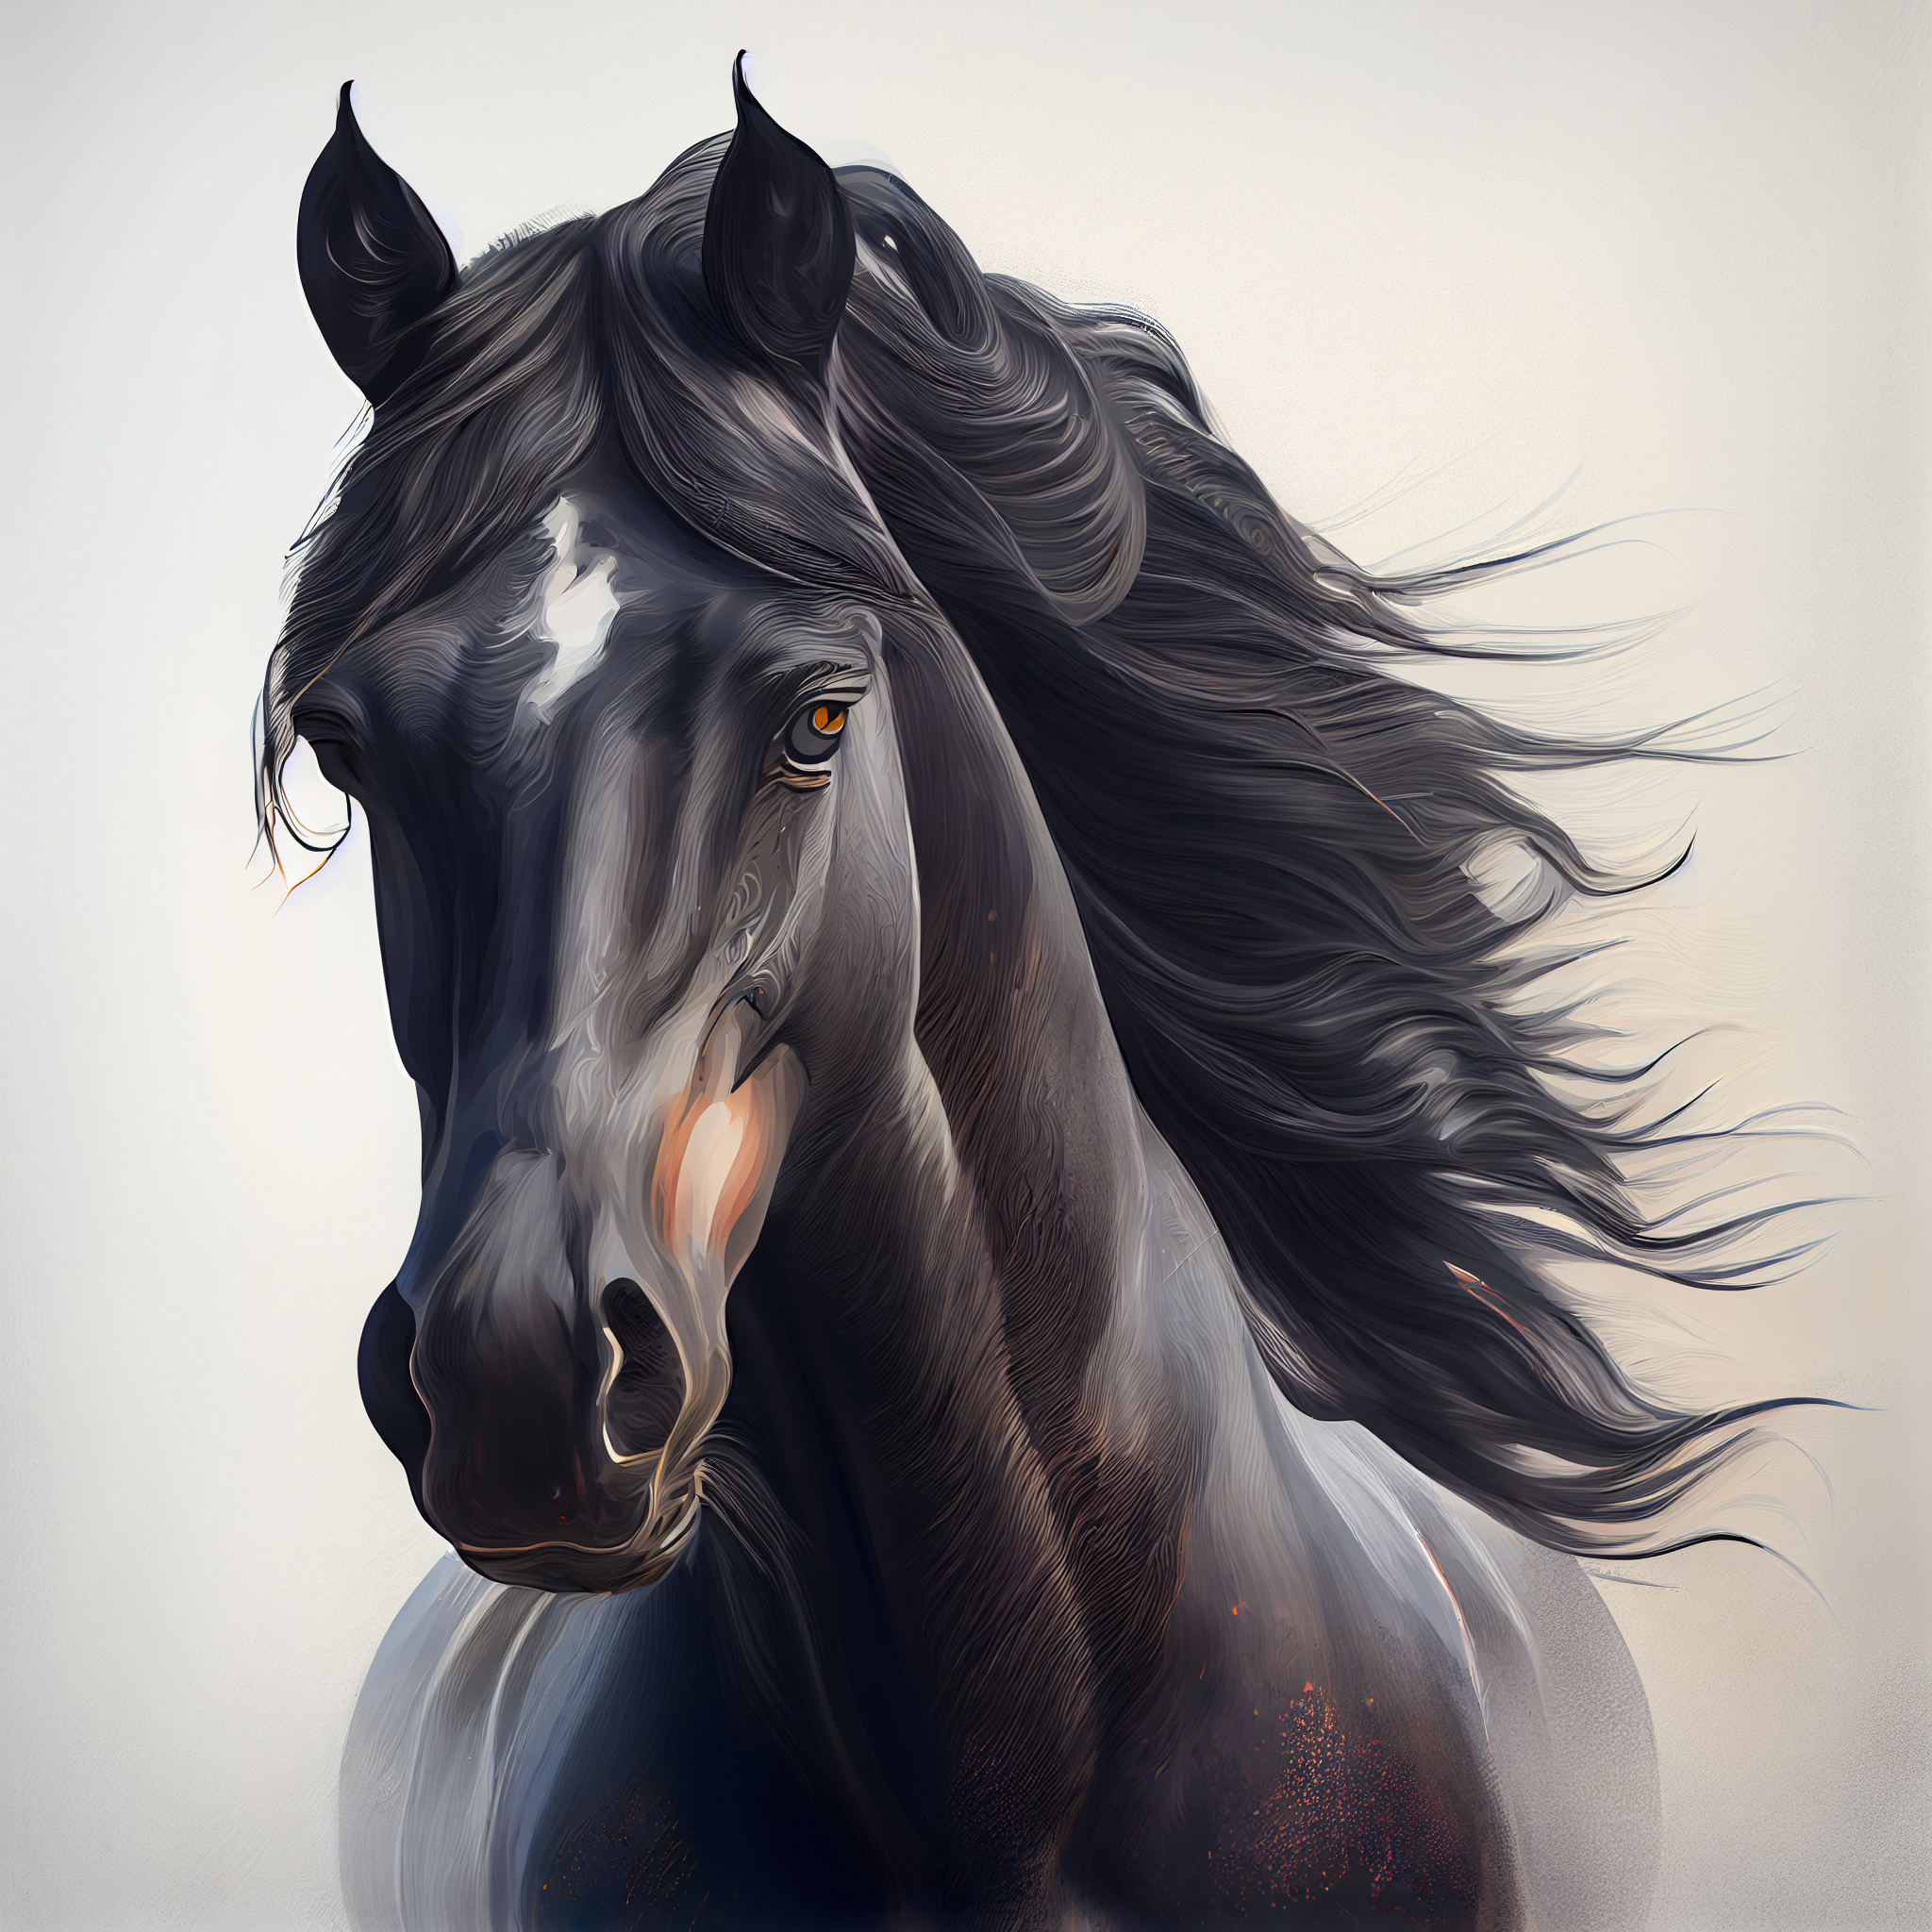 An Oil Color Print of a Majestic Black Stallion on a Dusty White Background